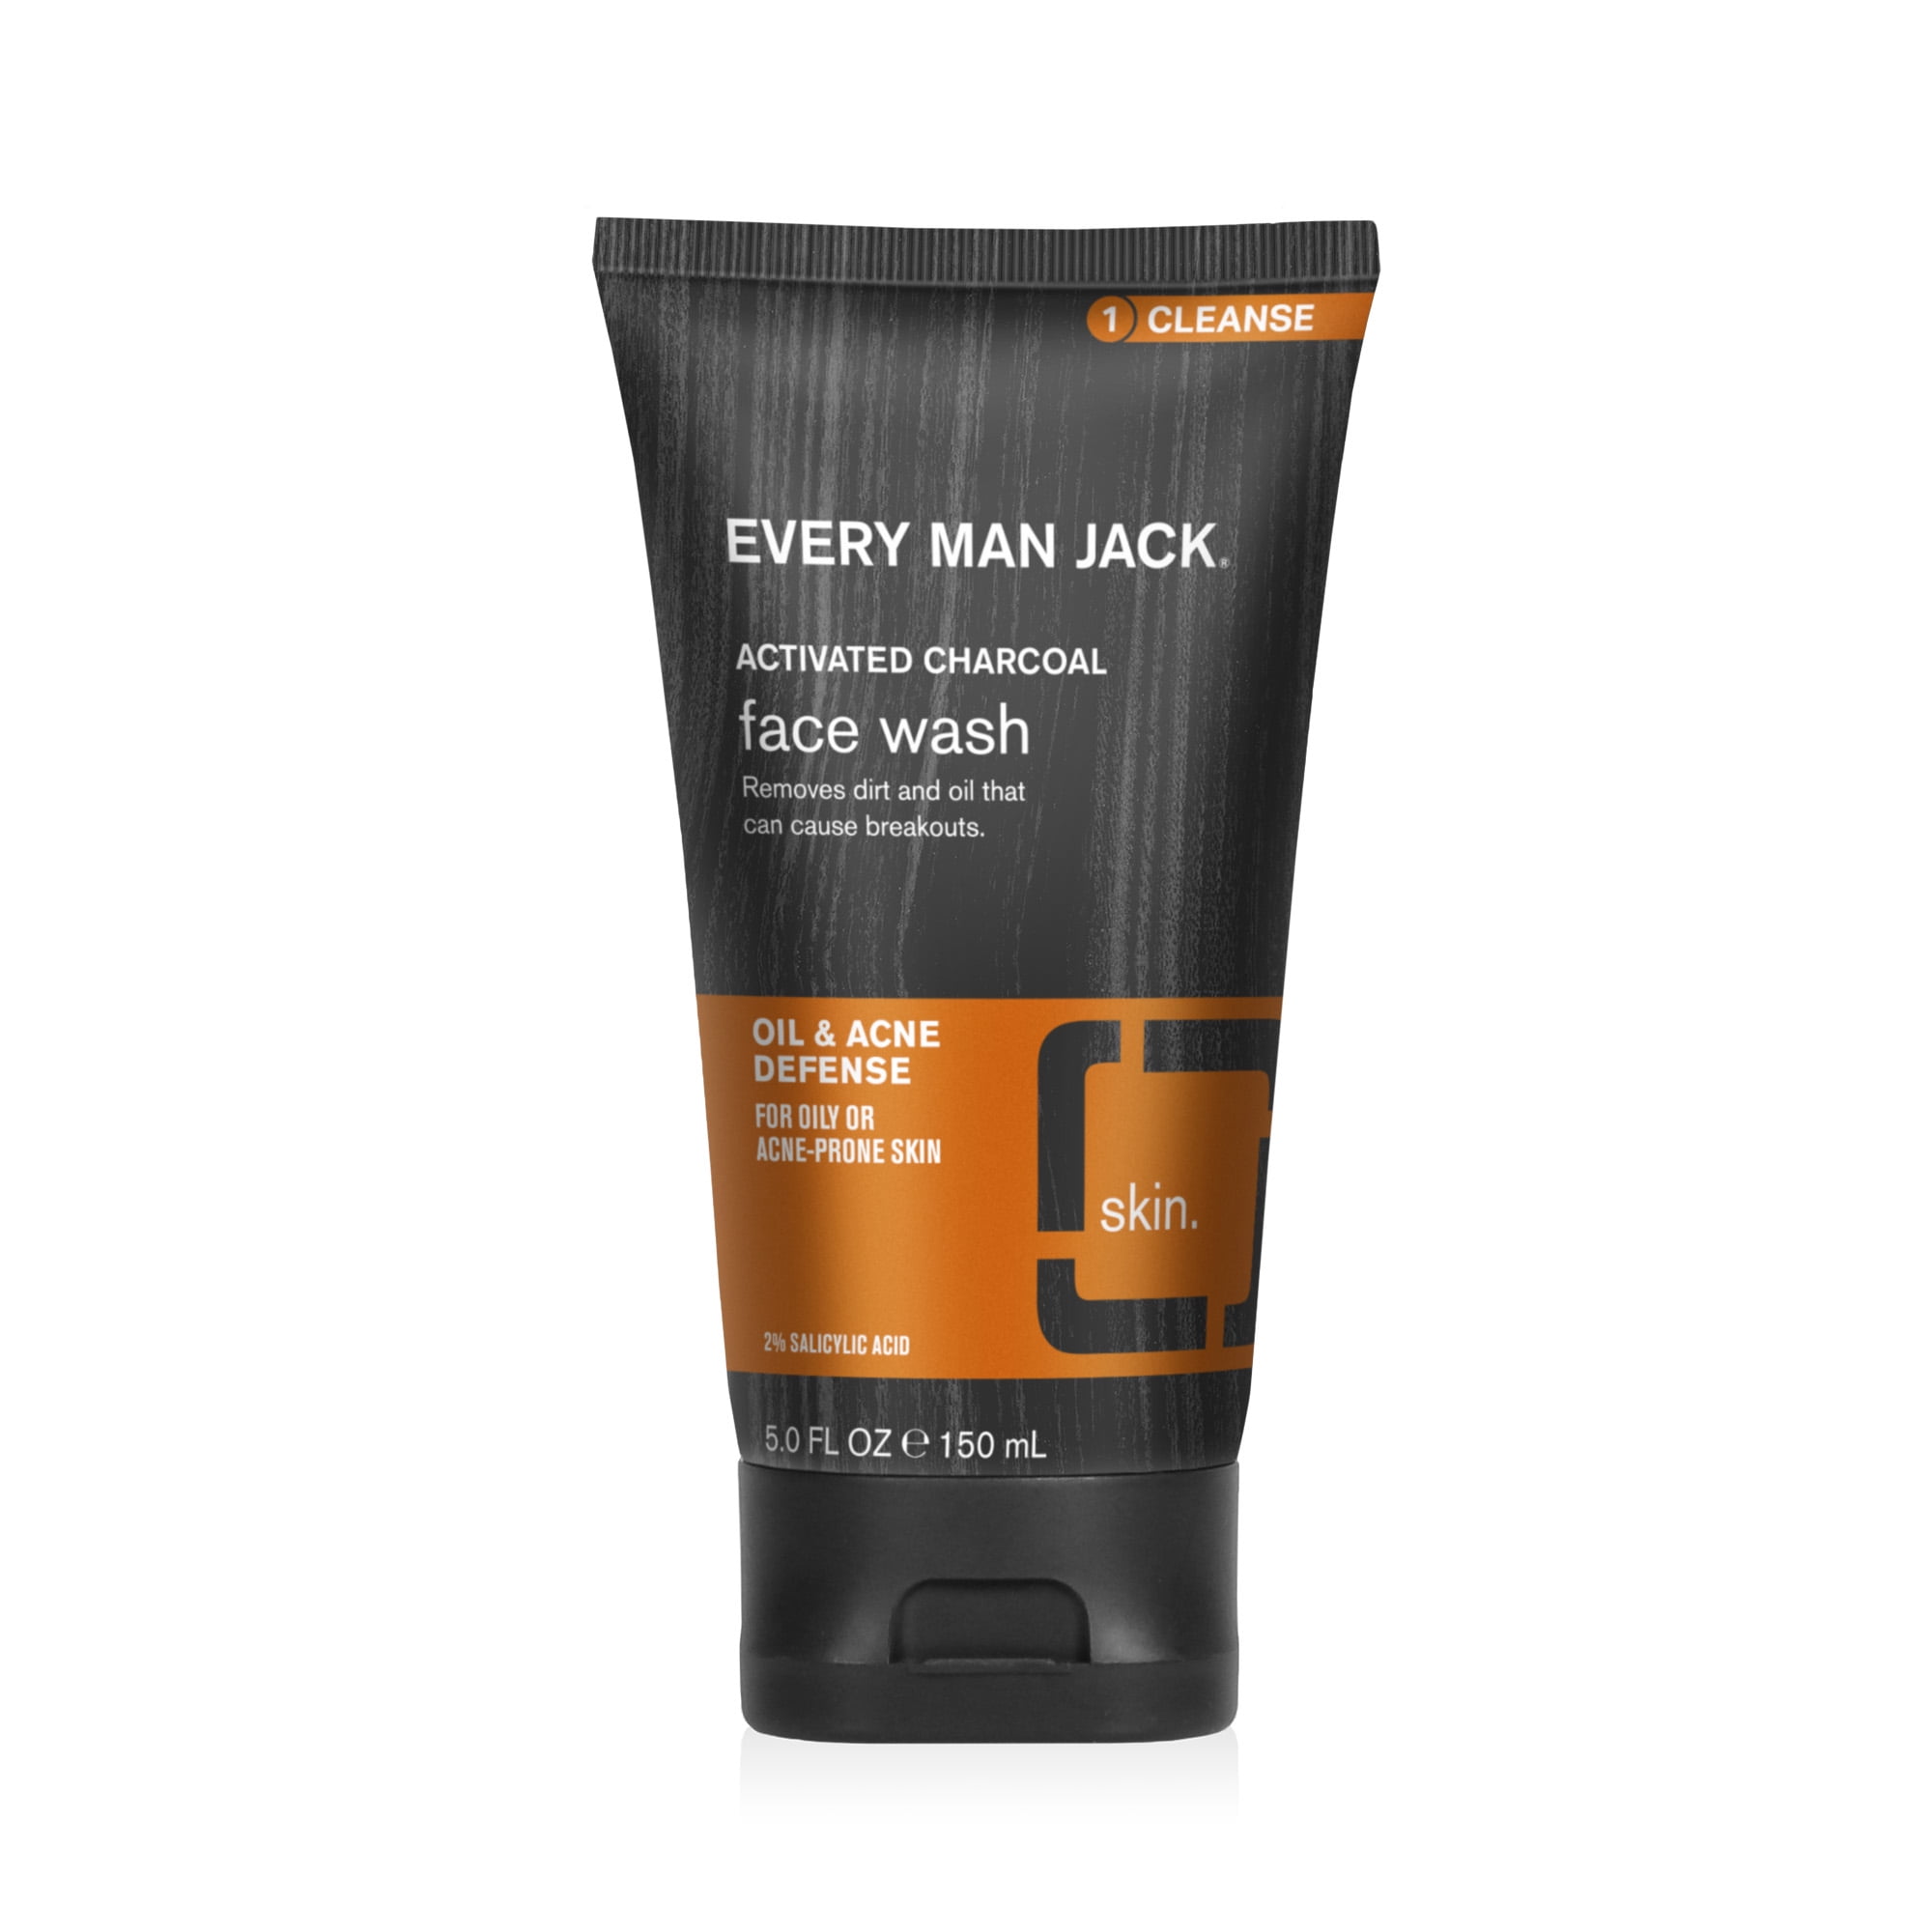 Every Man Jack Activated Charcoal Oil Defense Daily Energizing Face Wash for Men, Naturally Derived, 5 oz